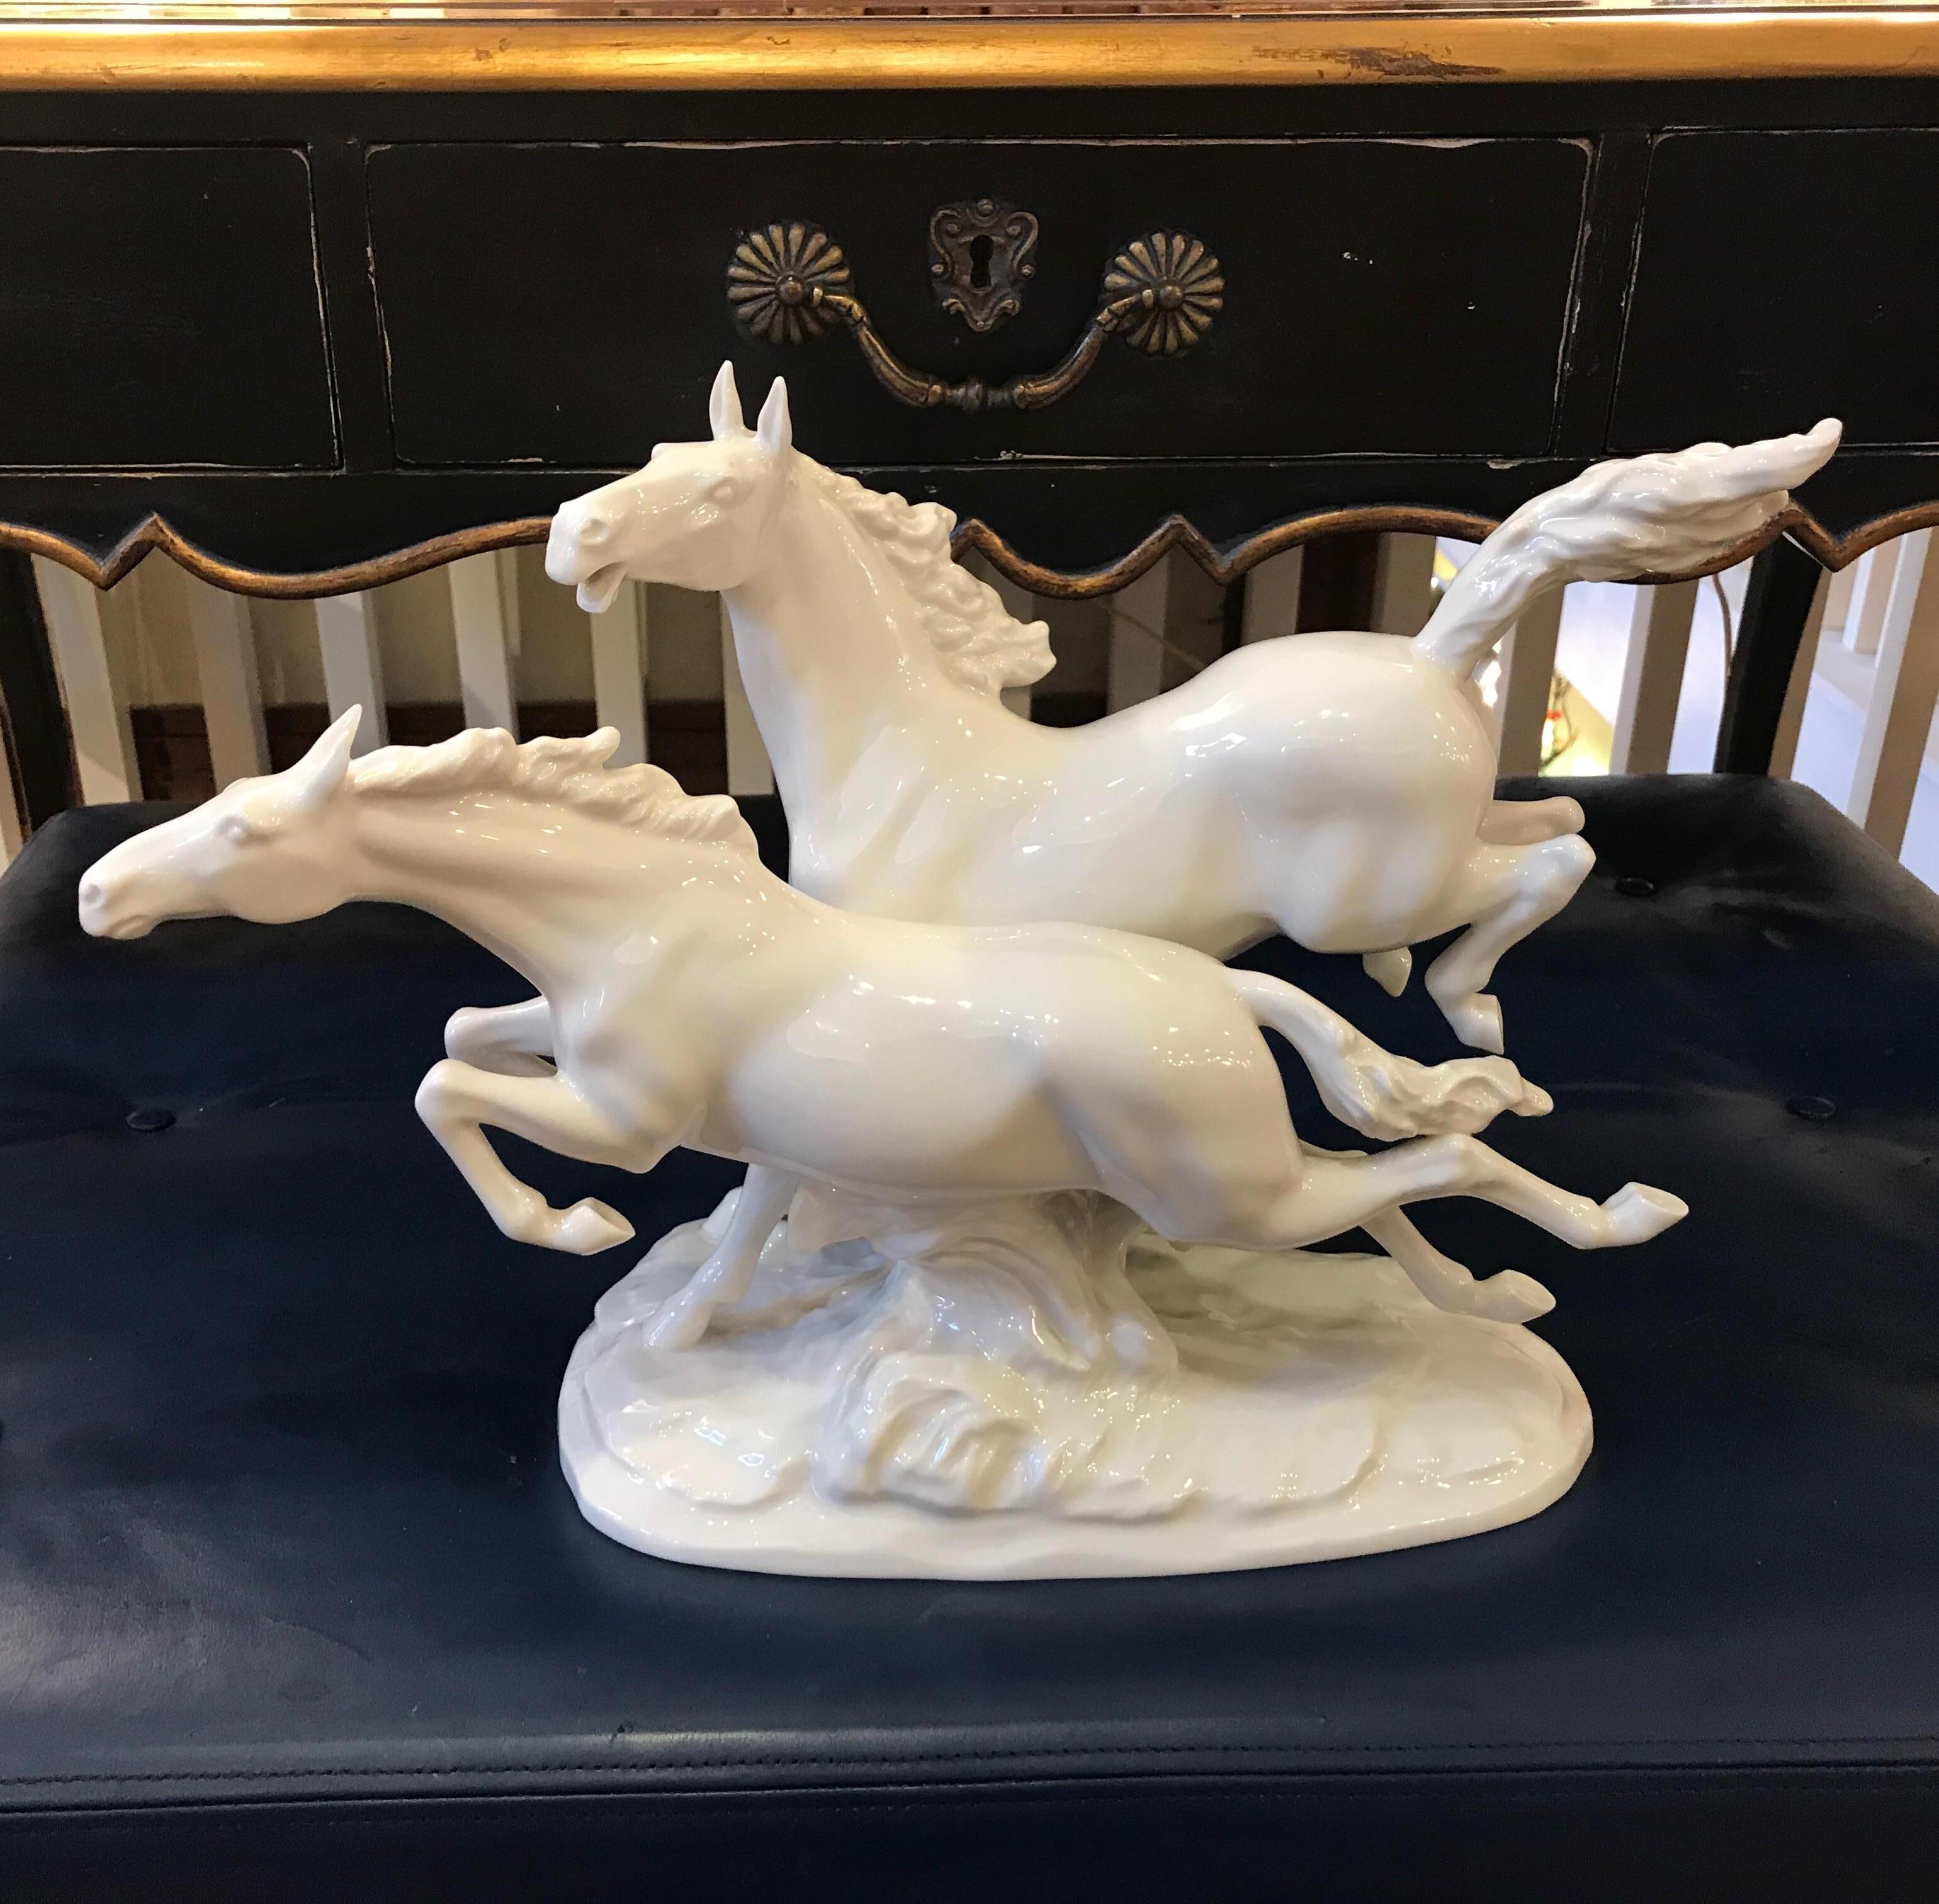 Graceful blanc de chine porcelain horses, Germany, circa 1930s. The pair of horses with flowing manes and tails on an oval textured base. Marked on underside, Hutschenreuther.